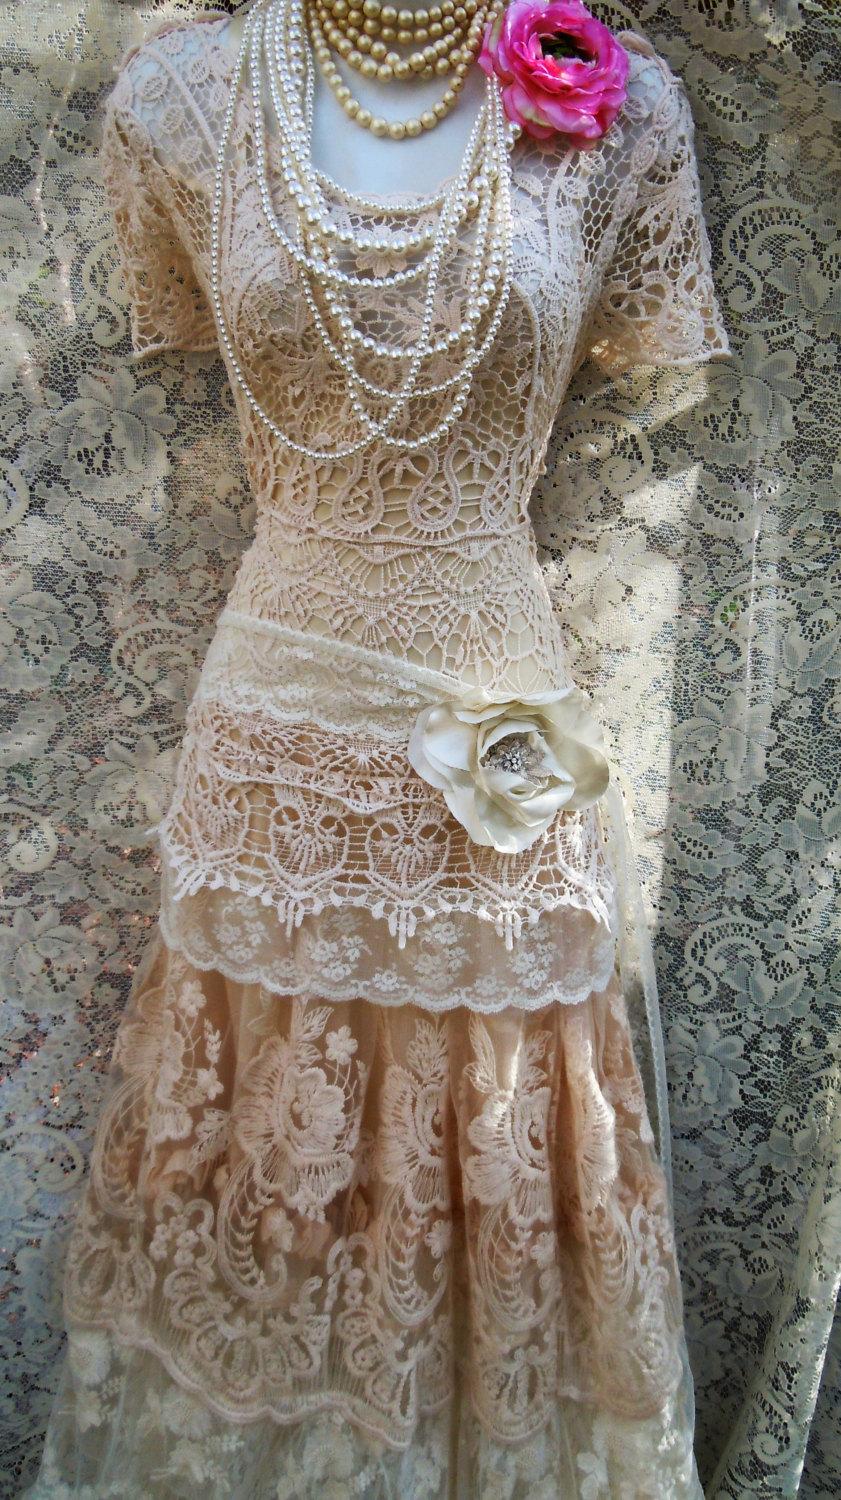 Mariage - Boho lace dress wedding cream crochet  tulle tiered   flapper  vintage  bride outdoor  romantic small  by vintage opulence on Etsy